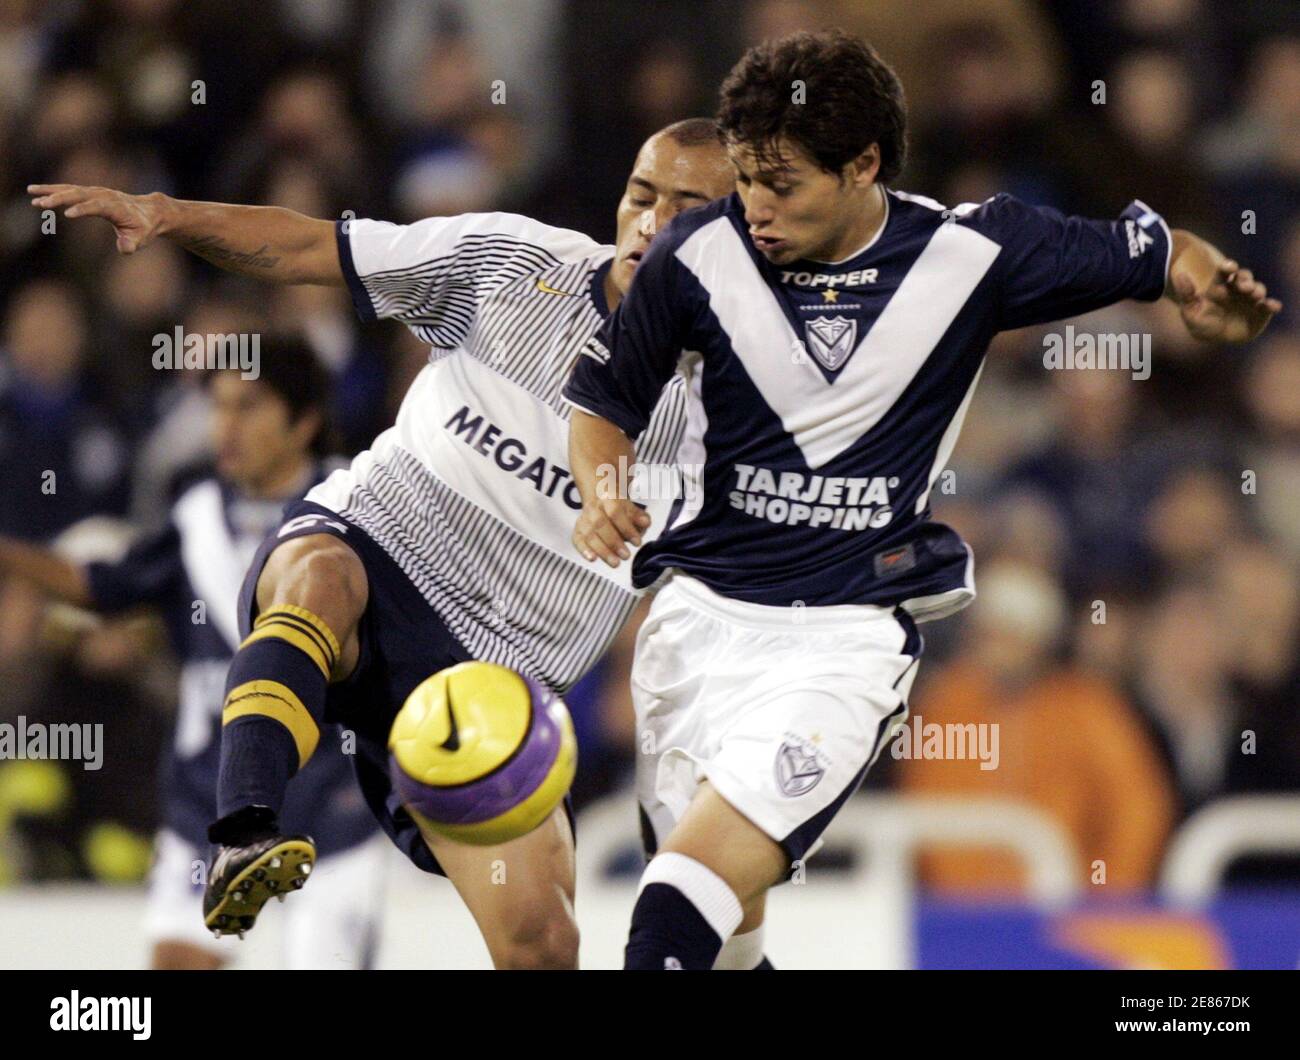 Velez Sarsfield's Mauro Zarate (R) fights for the ball with Boca Juniors'  Clemente Rodriguez during their Copa Libertadores soccer match in Buenos  Aires May 9, 2007. REUTERS/Marcos Brindicci (ARGENTINA Stock Photo - Alamy